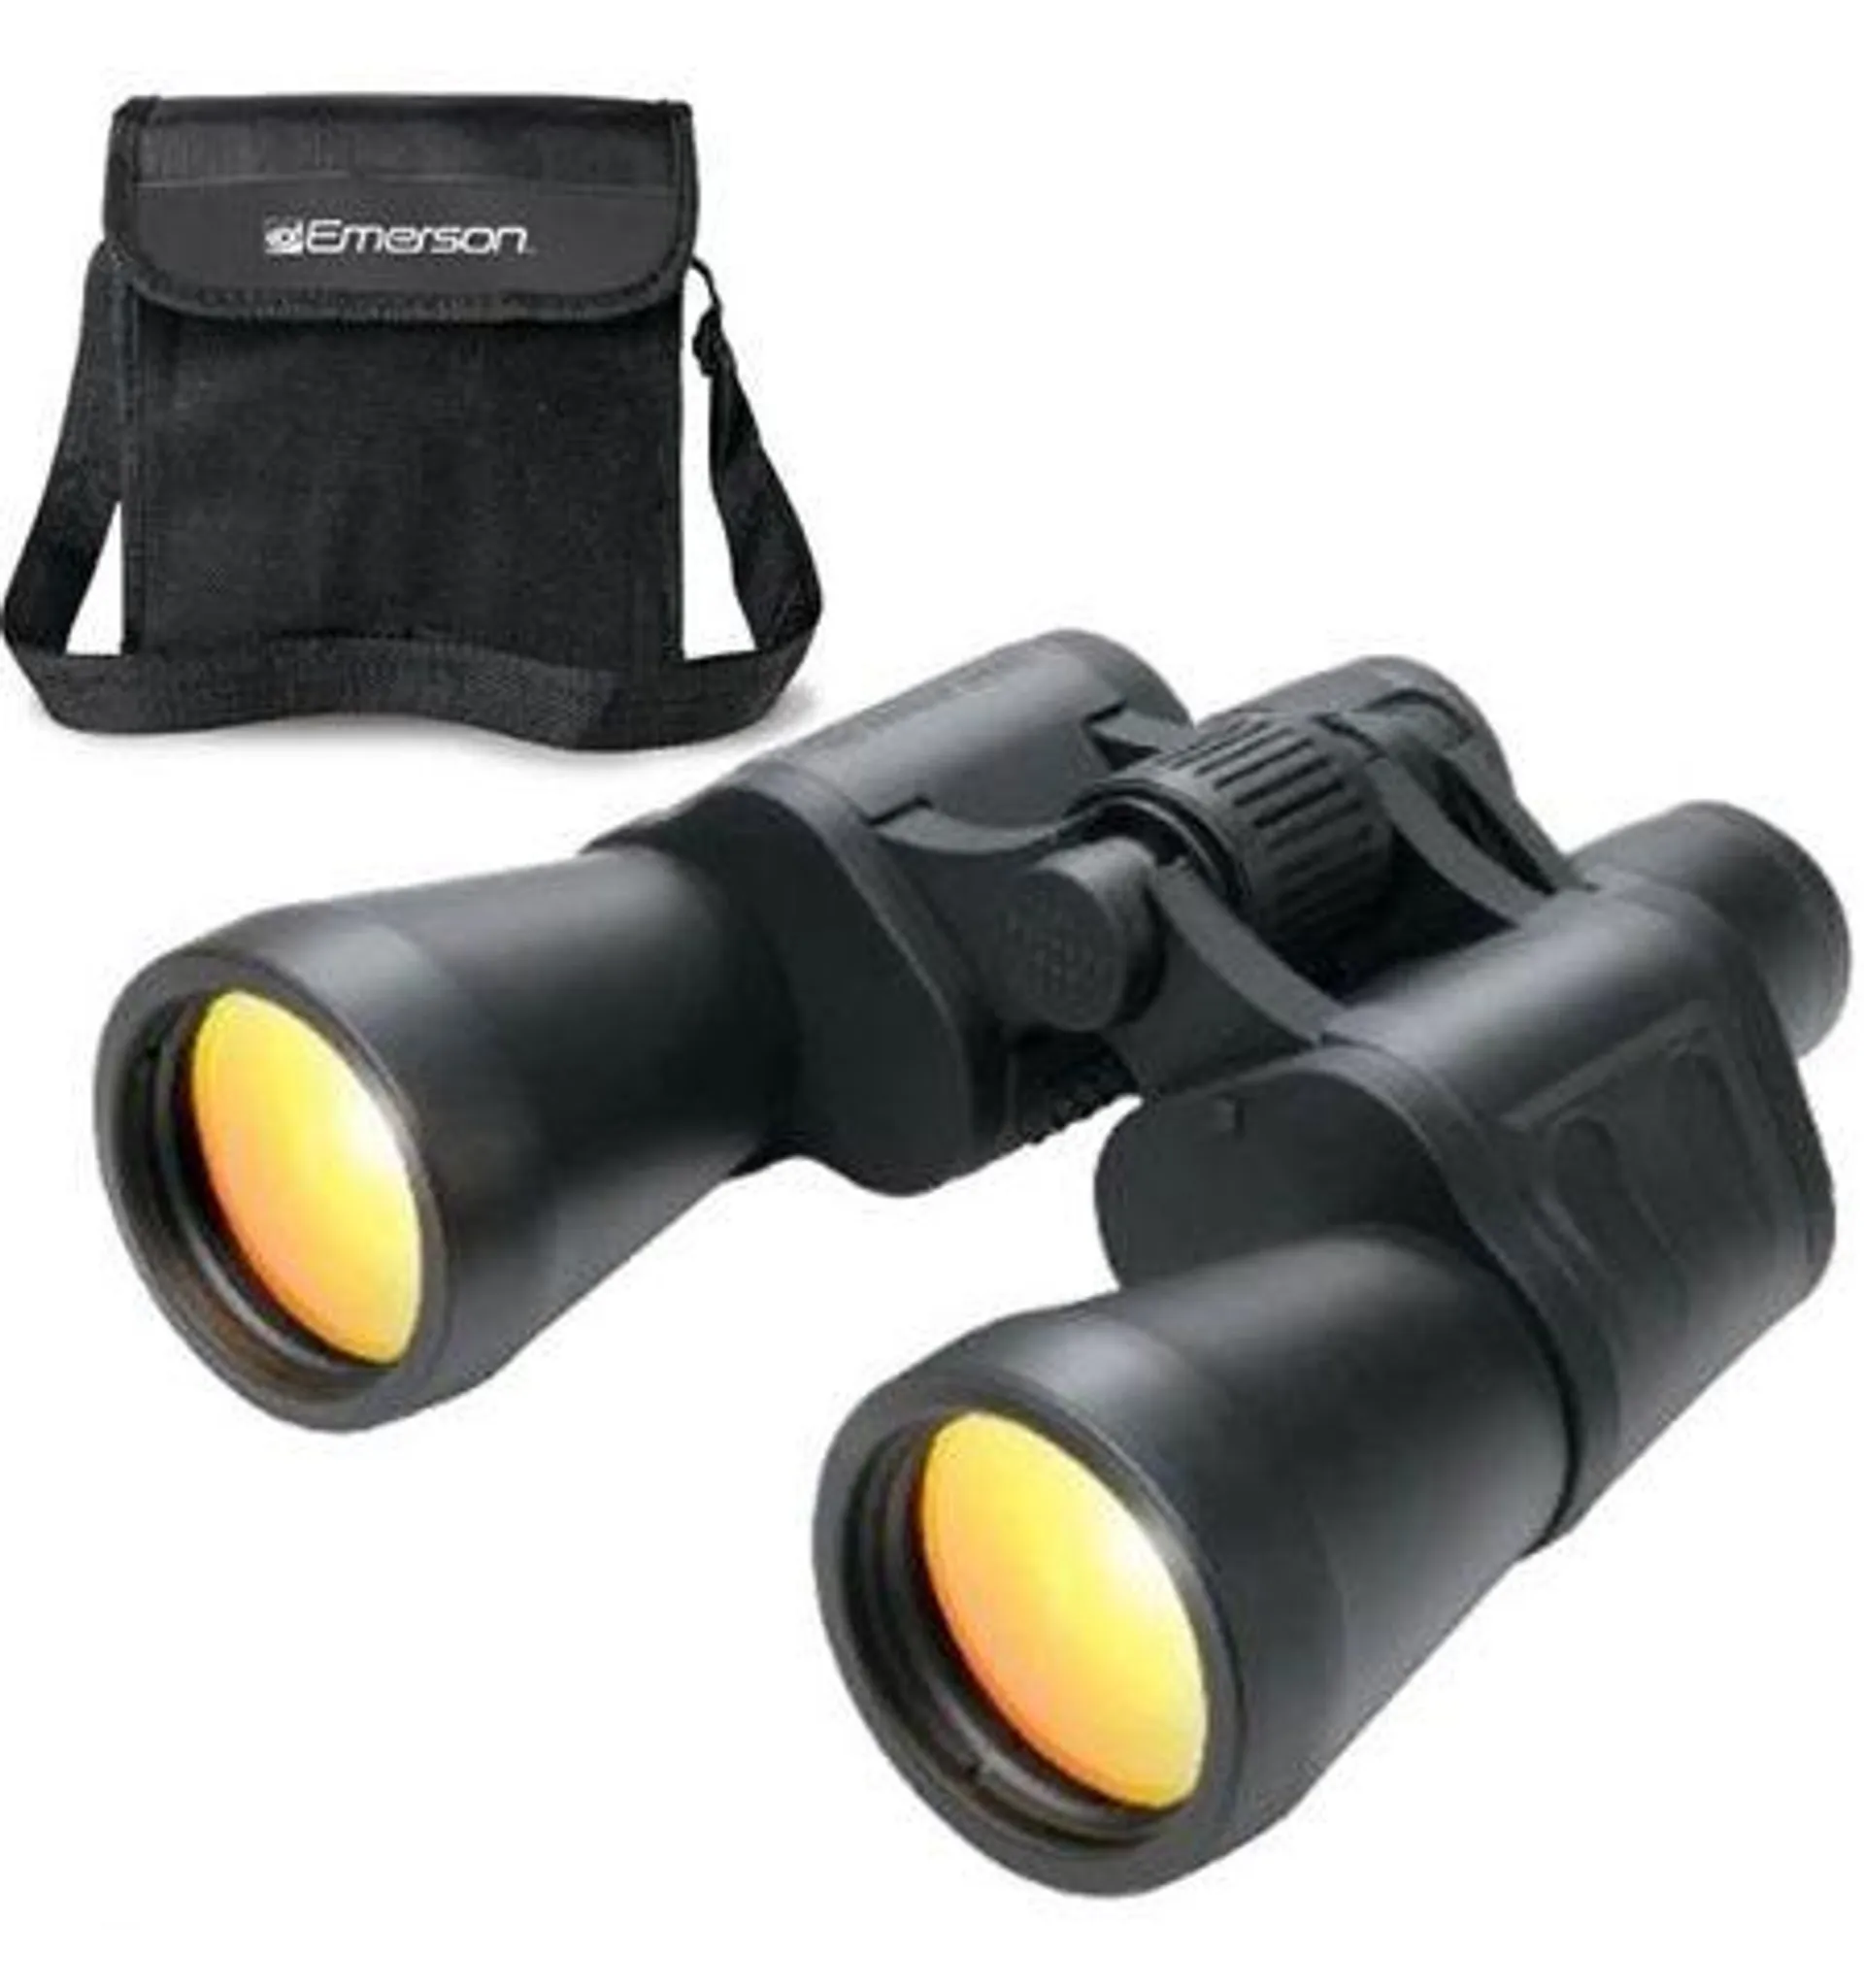 5X Binoculars with Carrying Case